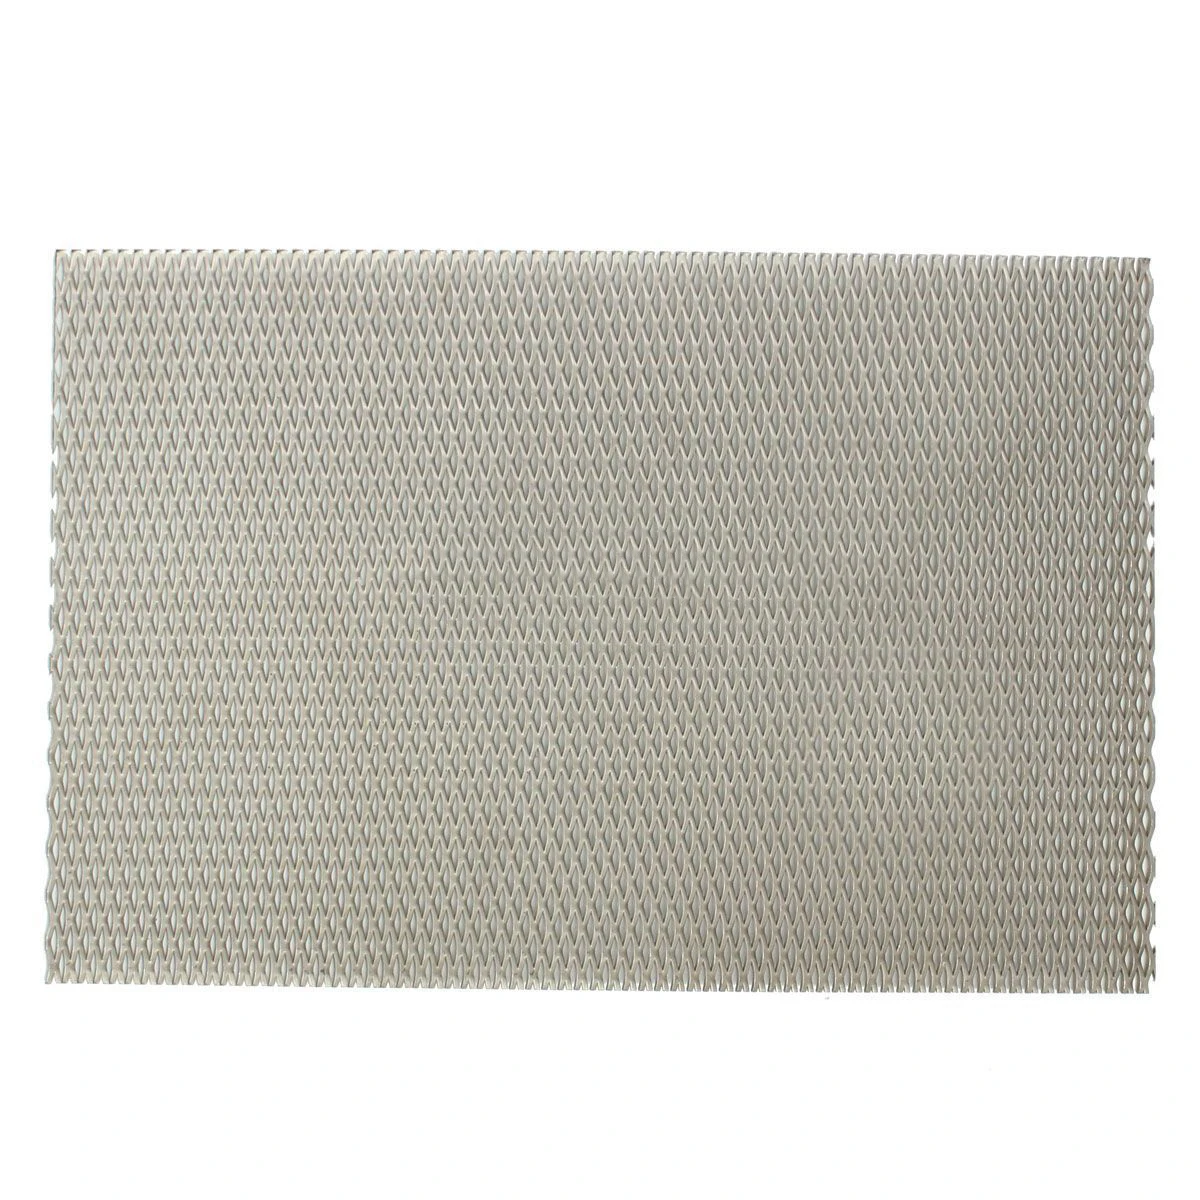 1pc Mayitr Practical Metal Titanium Mesh Sheet Heat Corrosion Resistance Silver Perforated Expanded Plate 200mm*300mm*0.5mm